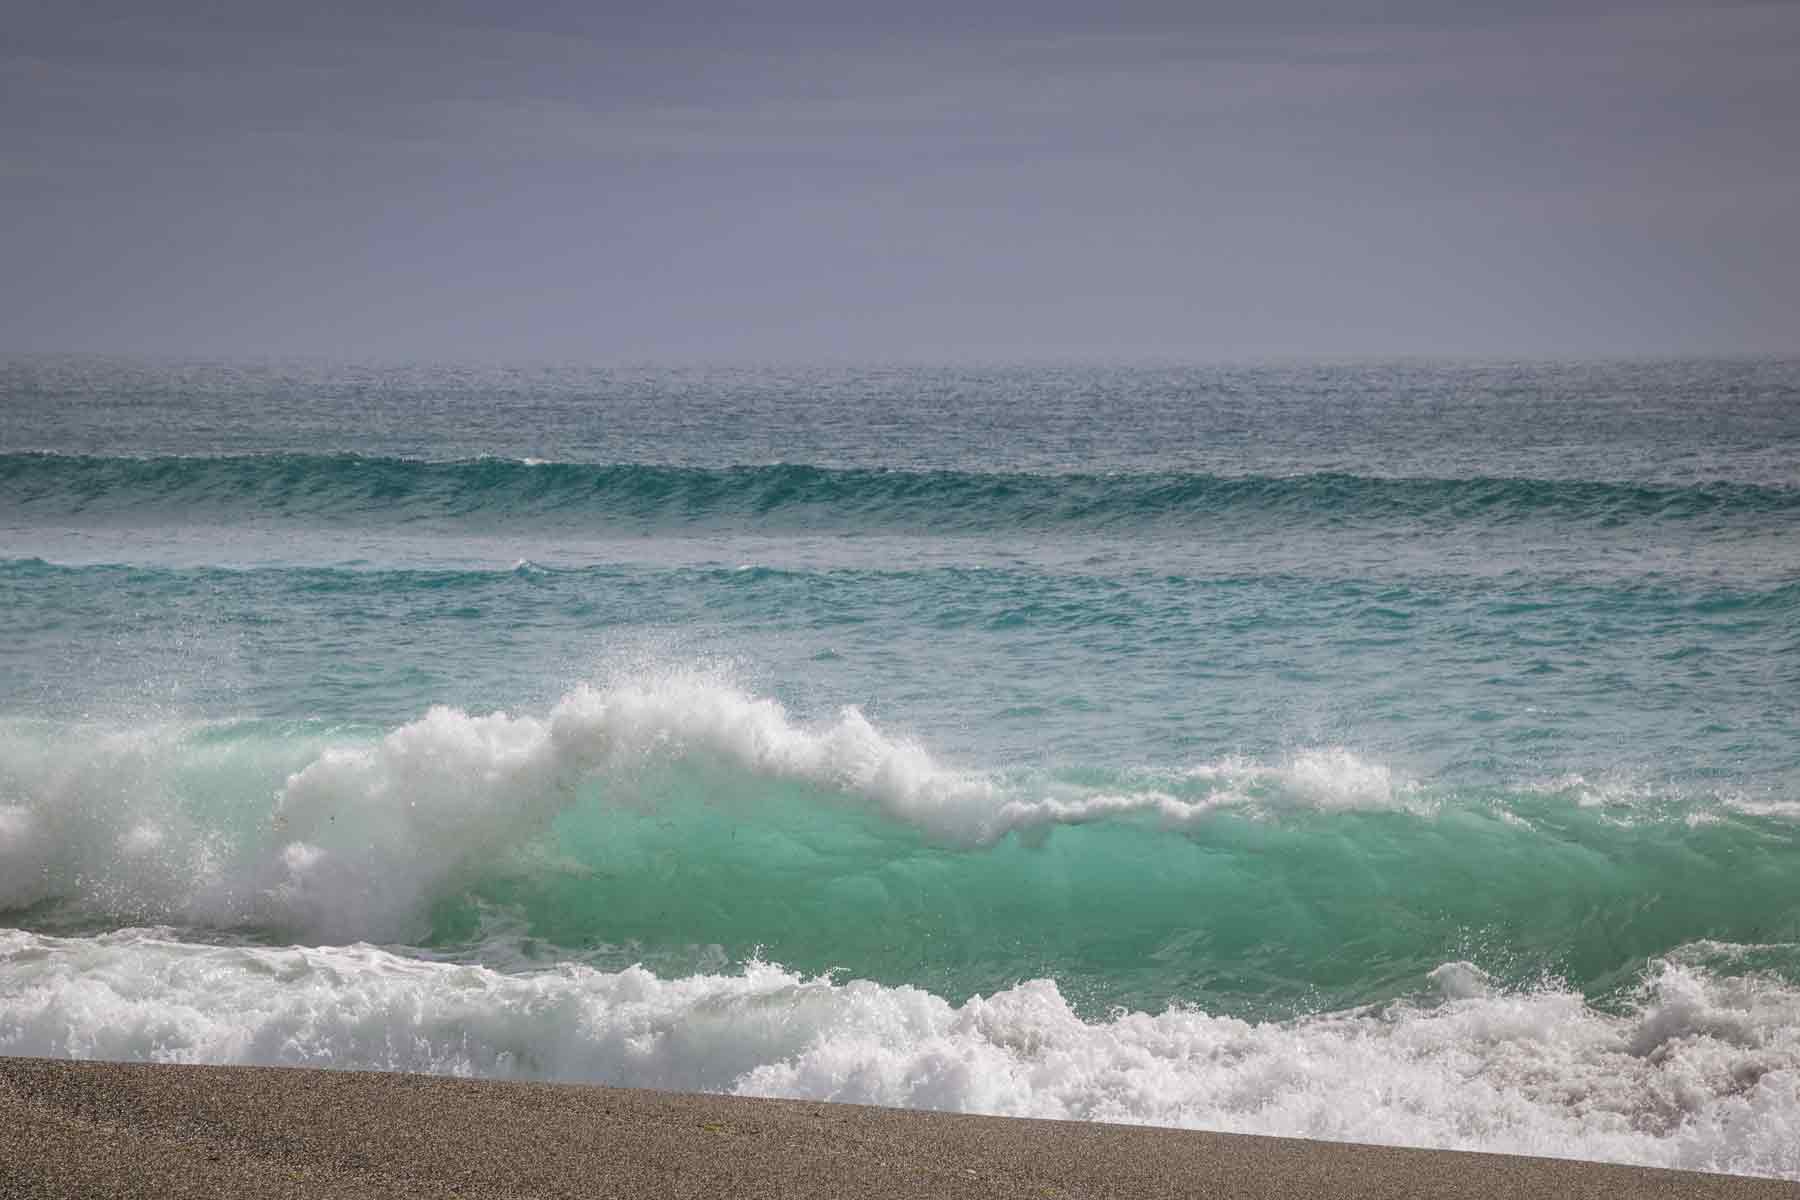 Wave breaking with clear sea green water